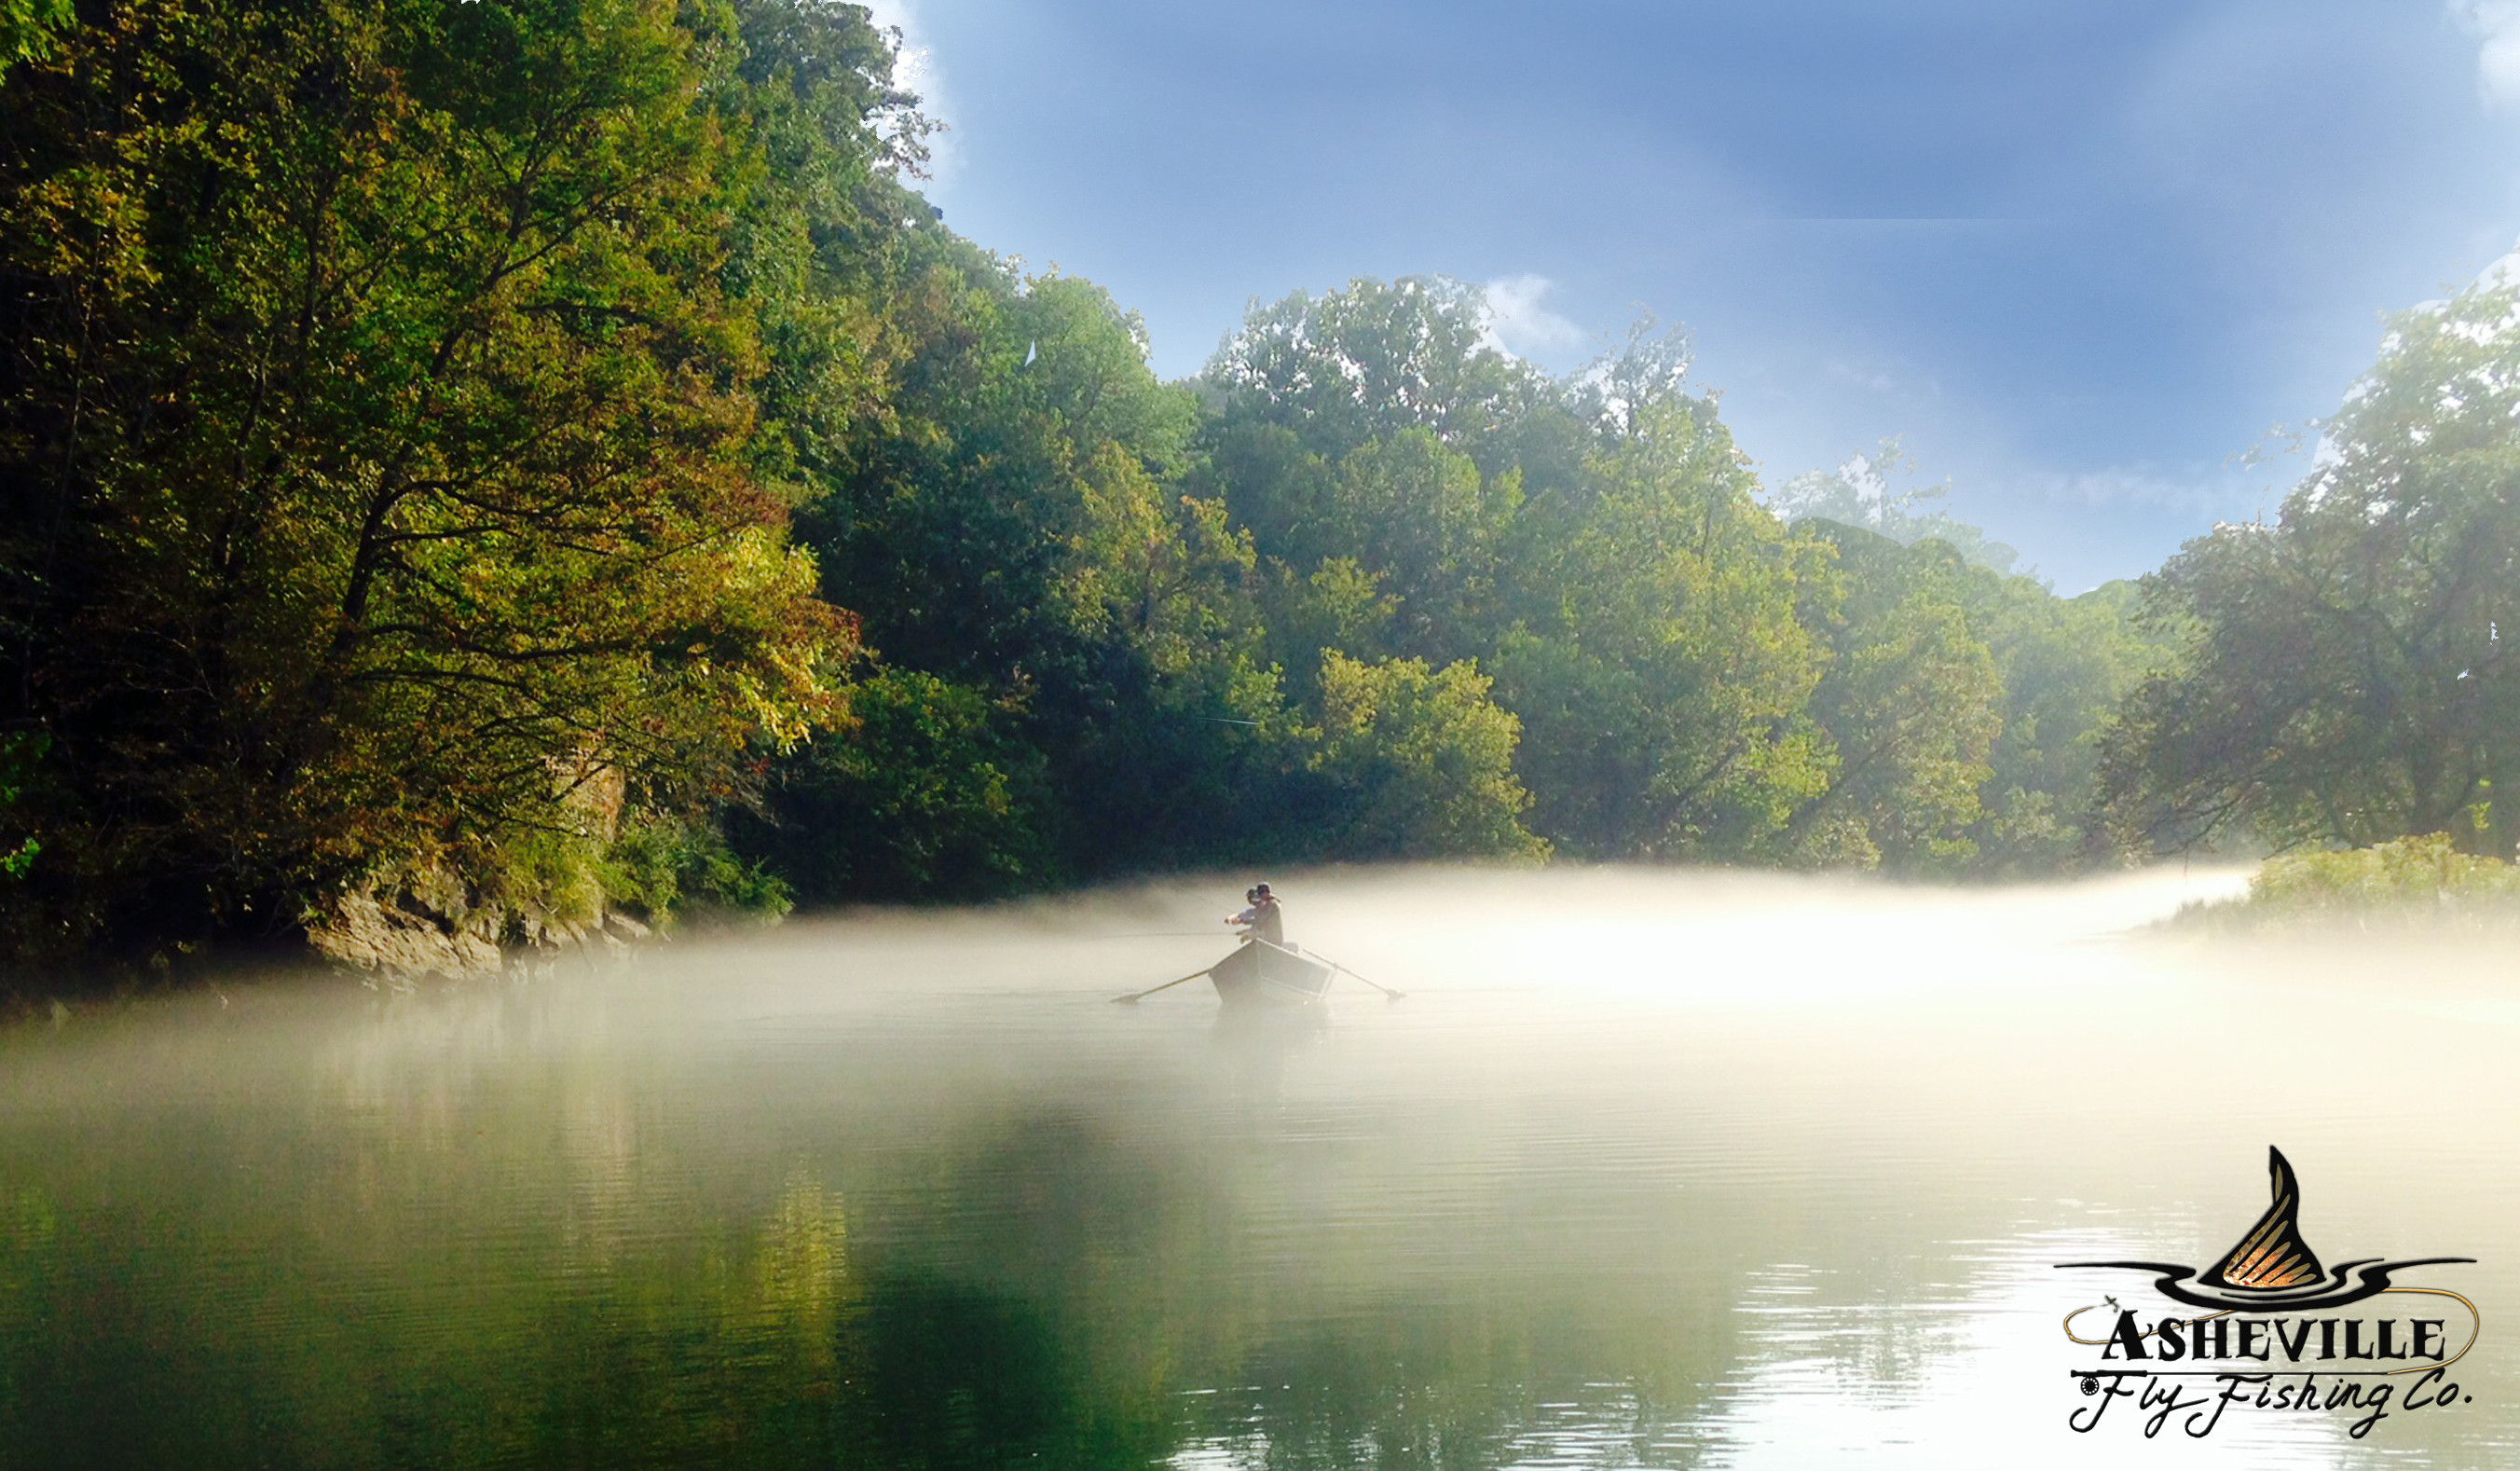 Asheville Fly Fishing Company: Overnight Trips